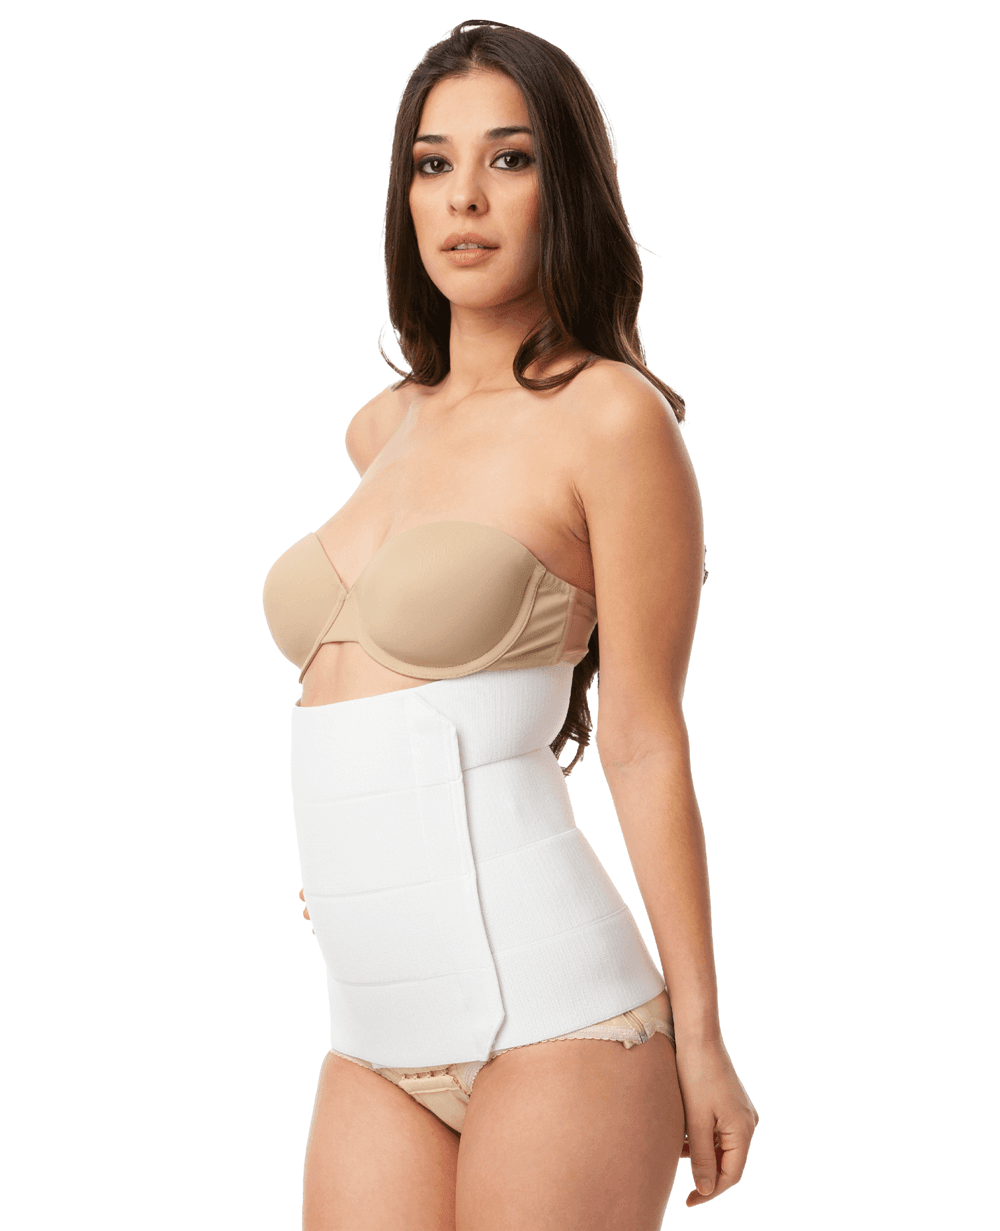 Abdominal Compression Binder –Style 13: Abdominal Binder Post Surgery –  Ideal for Post Tummy Tuck, Abdominoplasty, Mommy Makeover & More!